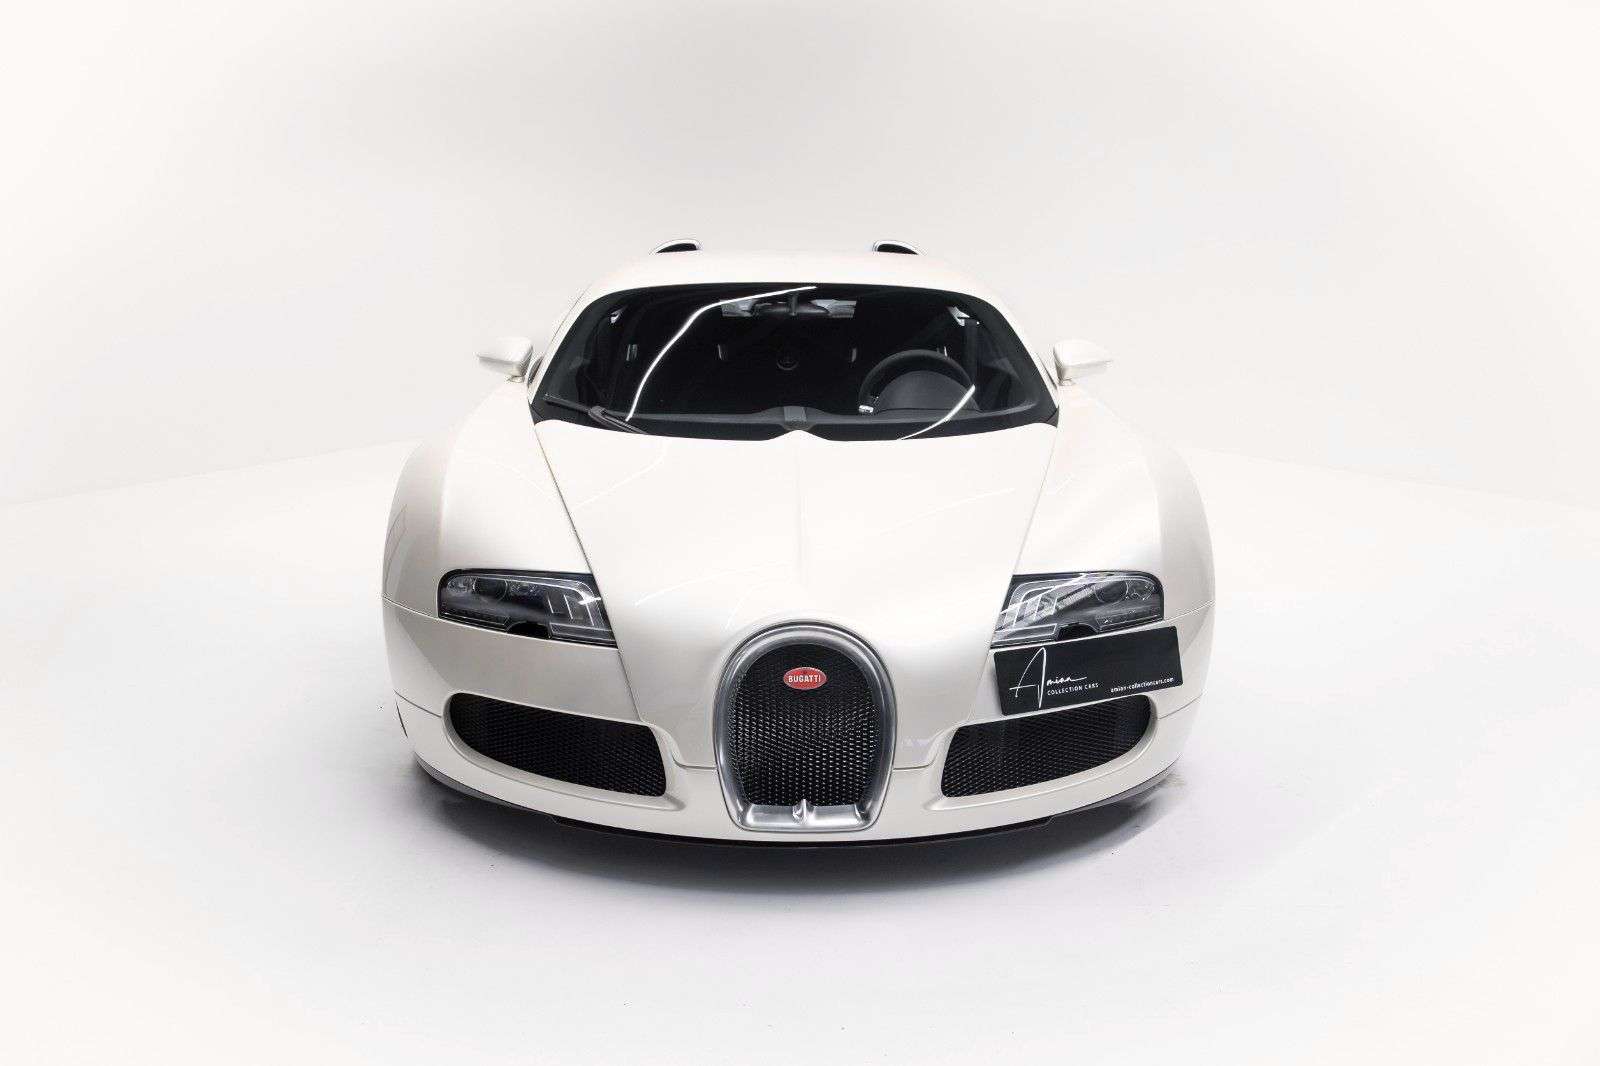 Bugatti Veyron Coupe in White used in Kerpen for € 1,490,000.-